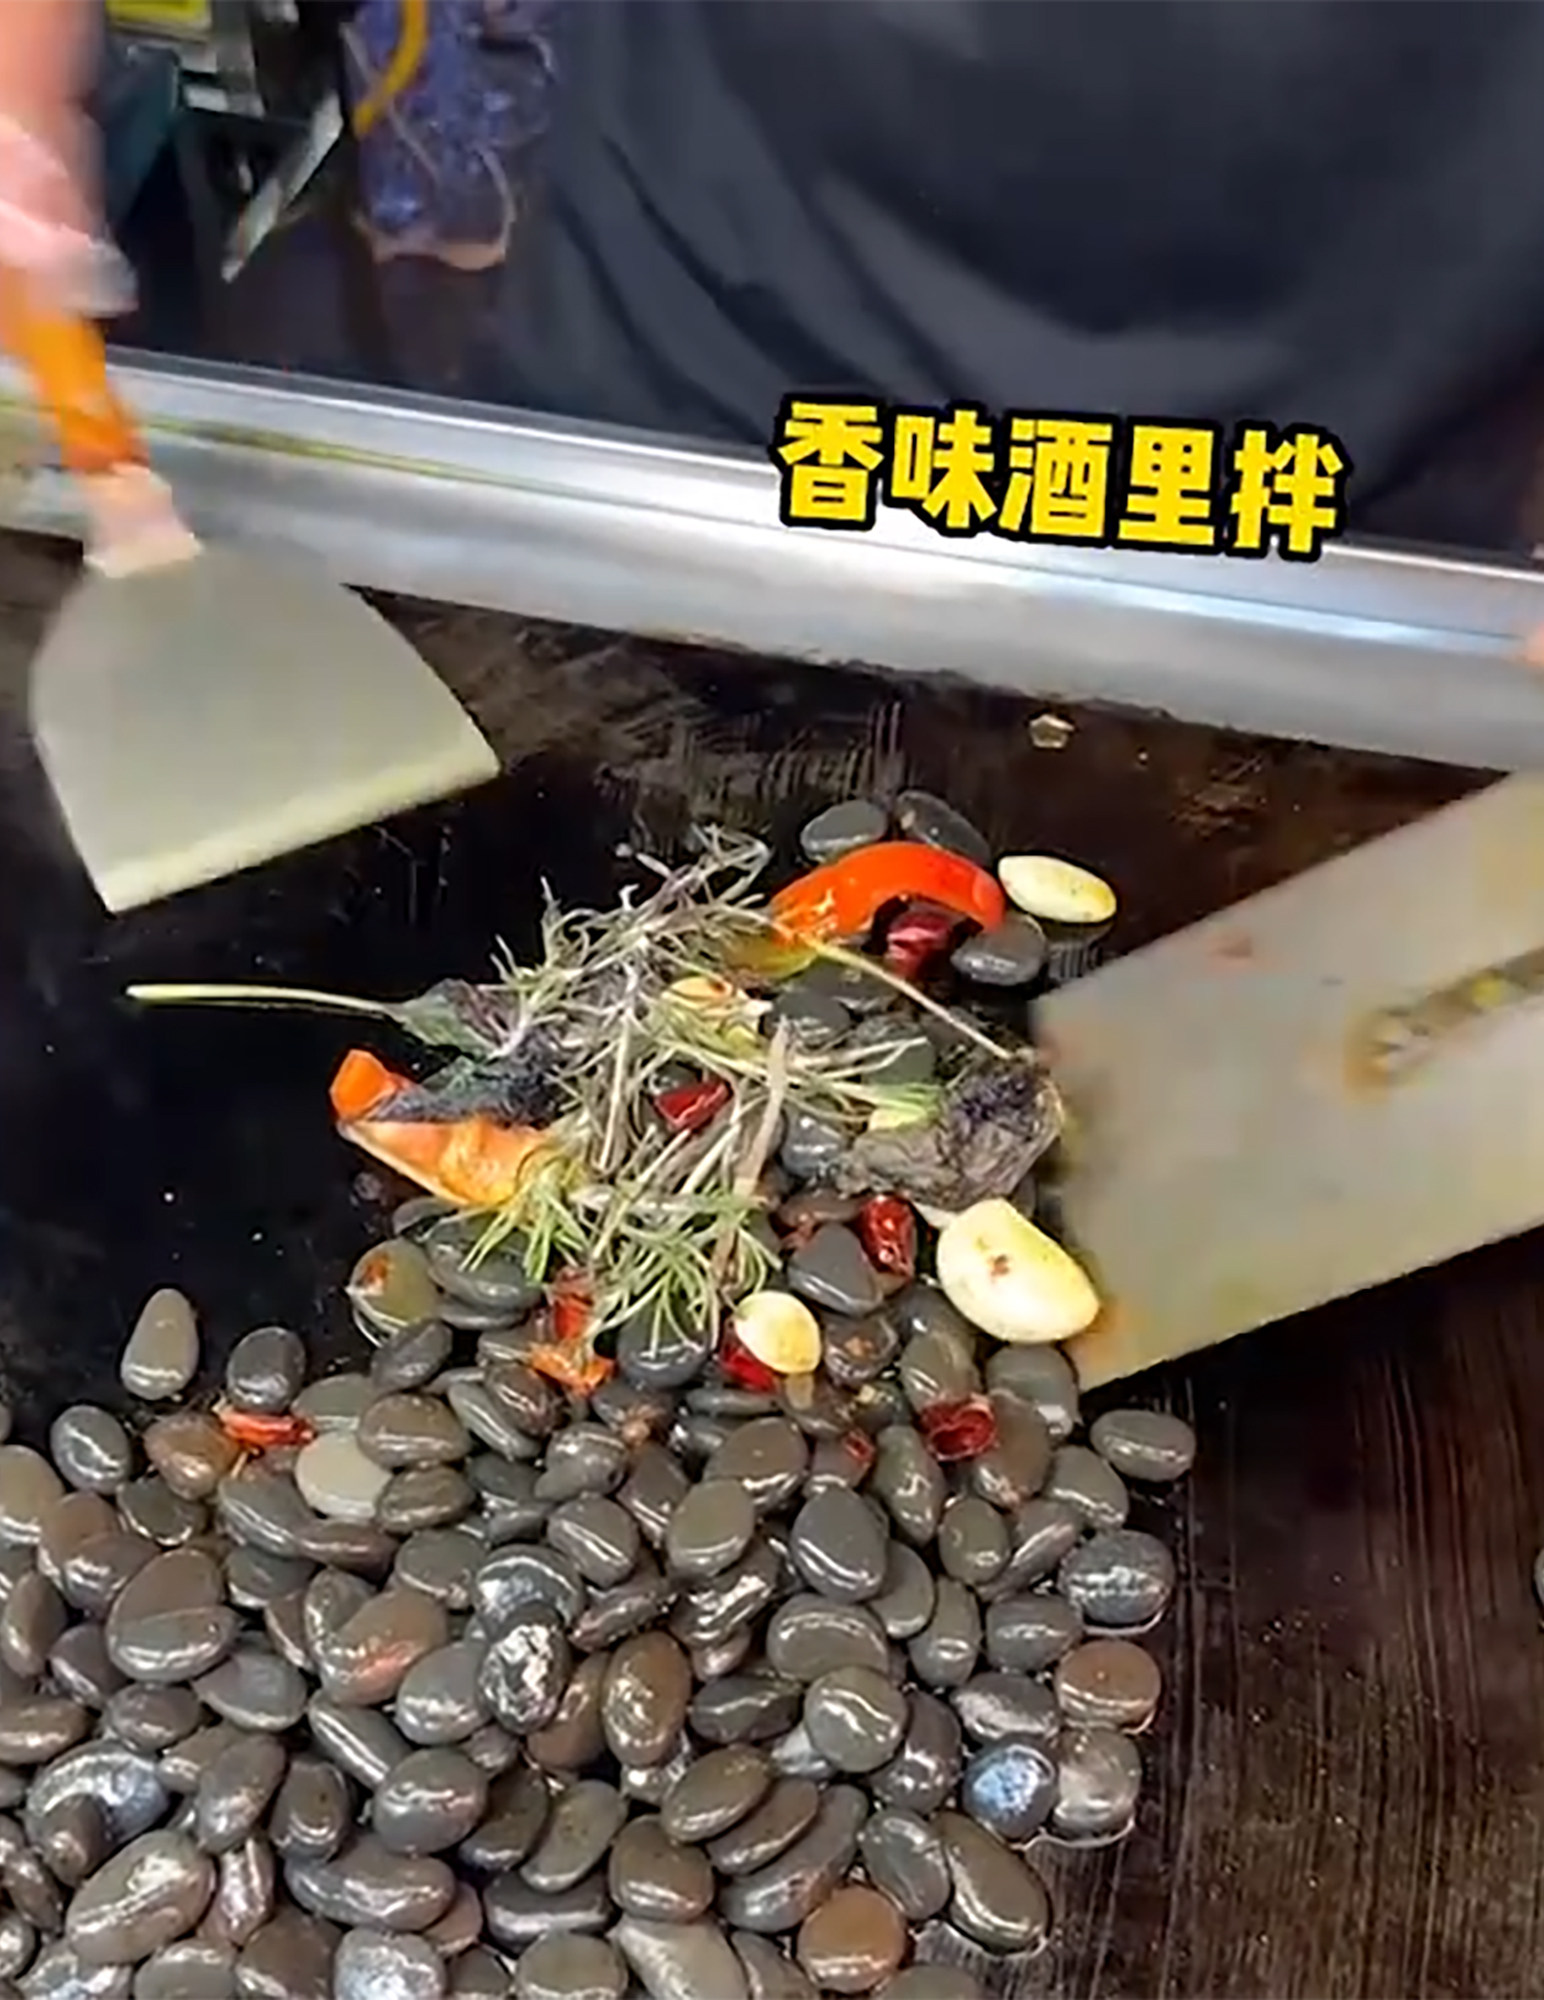 According to the vendor, the pebbles are not meant to be eaten – just sucked on. Photo: Baidu